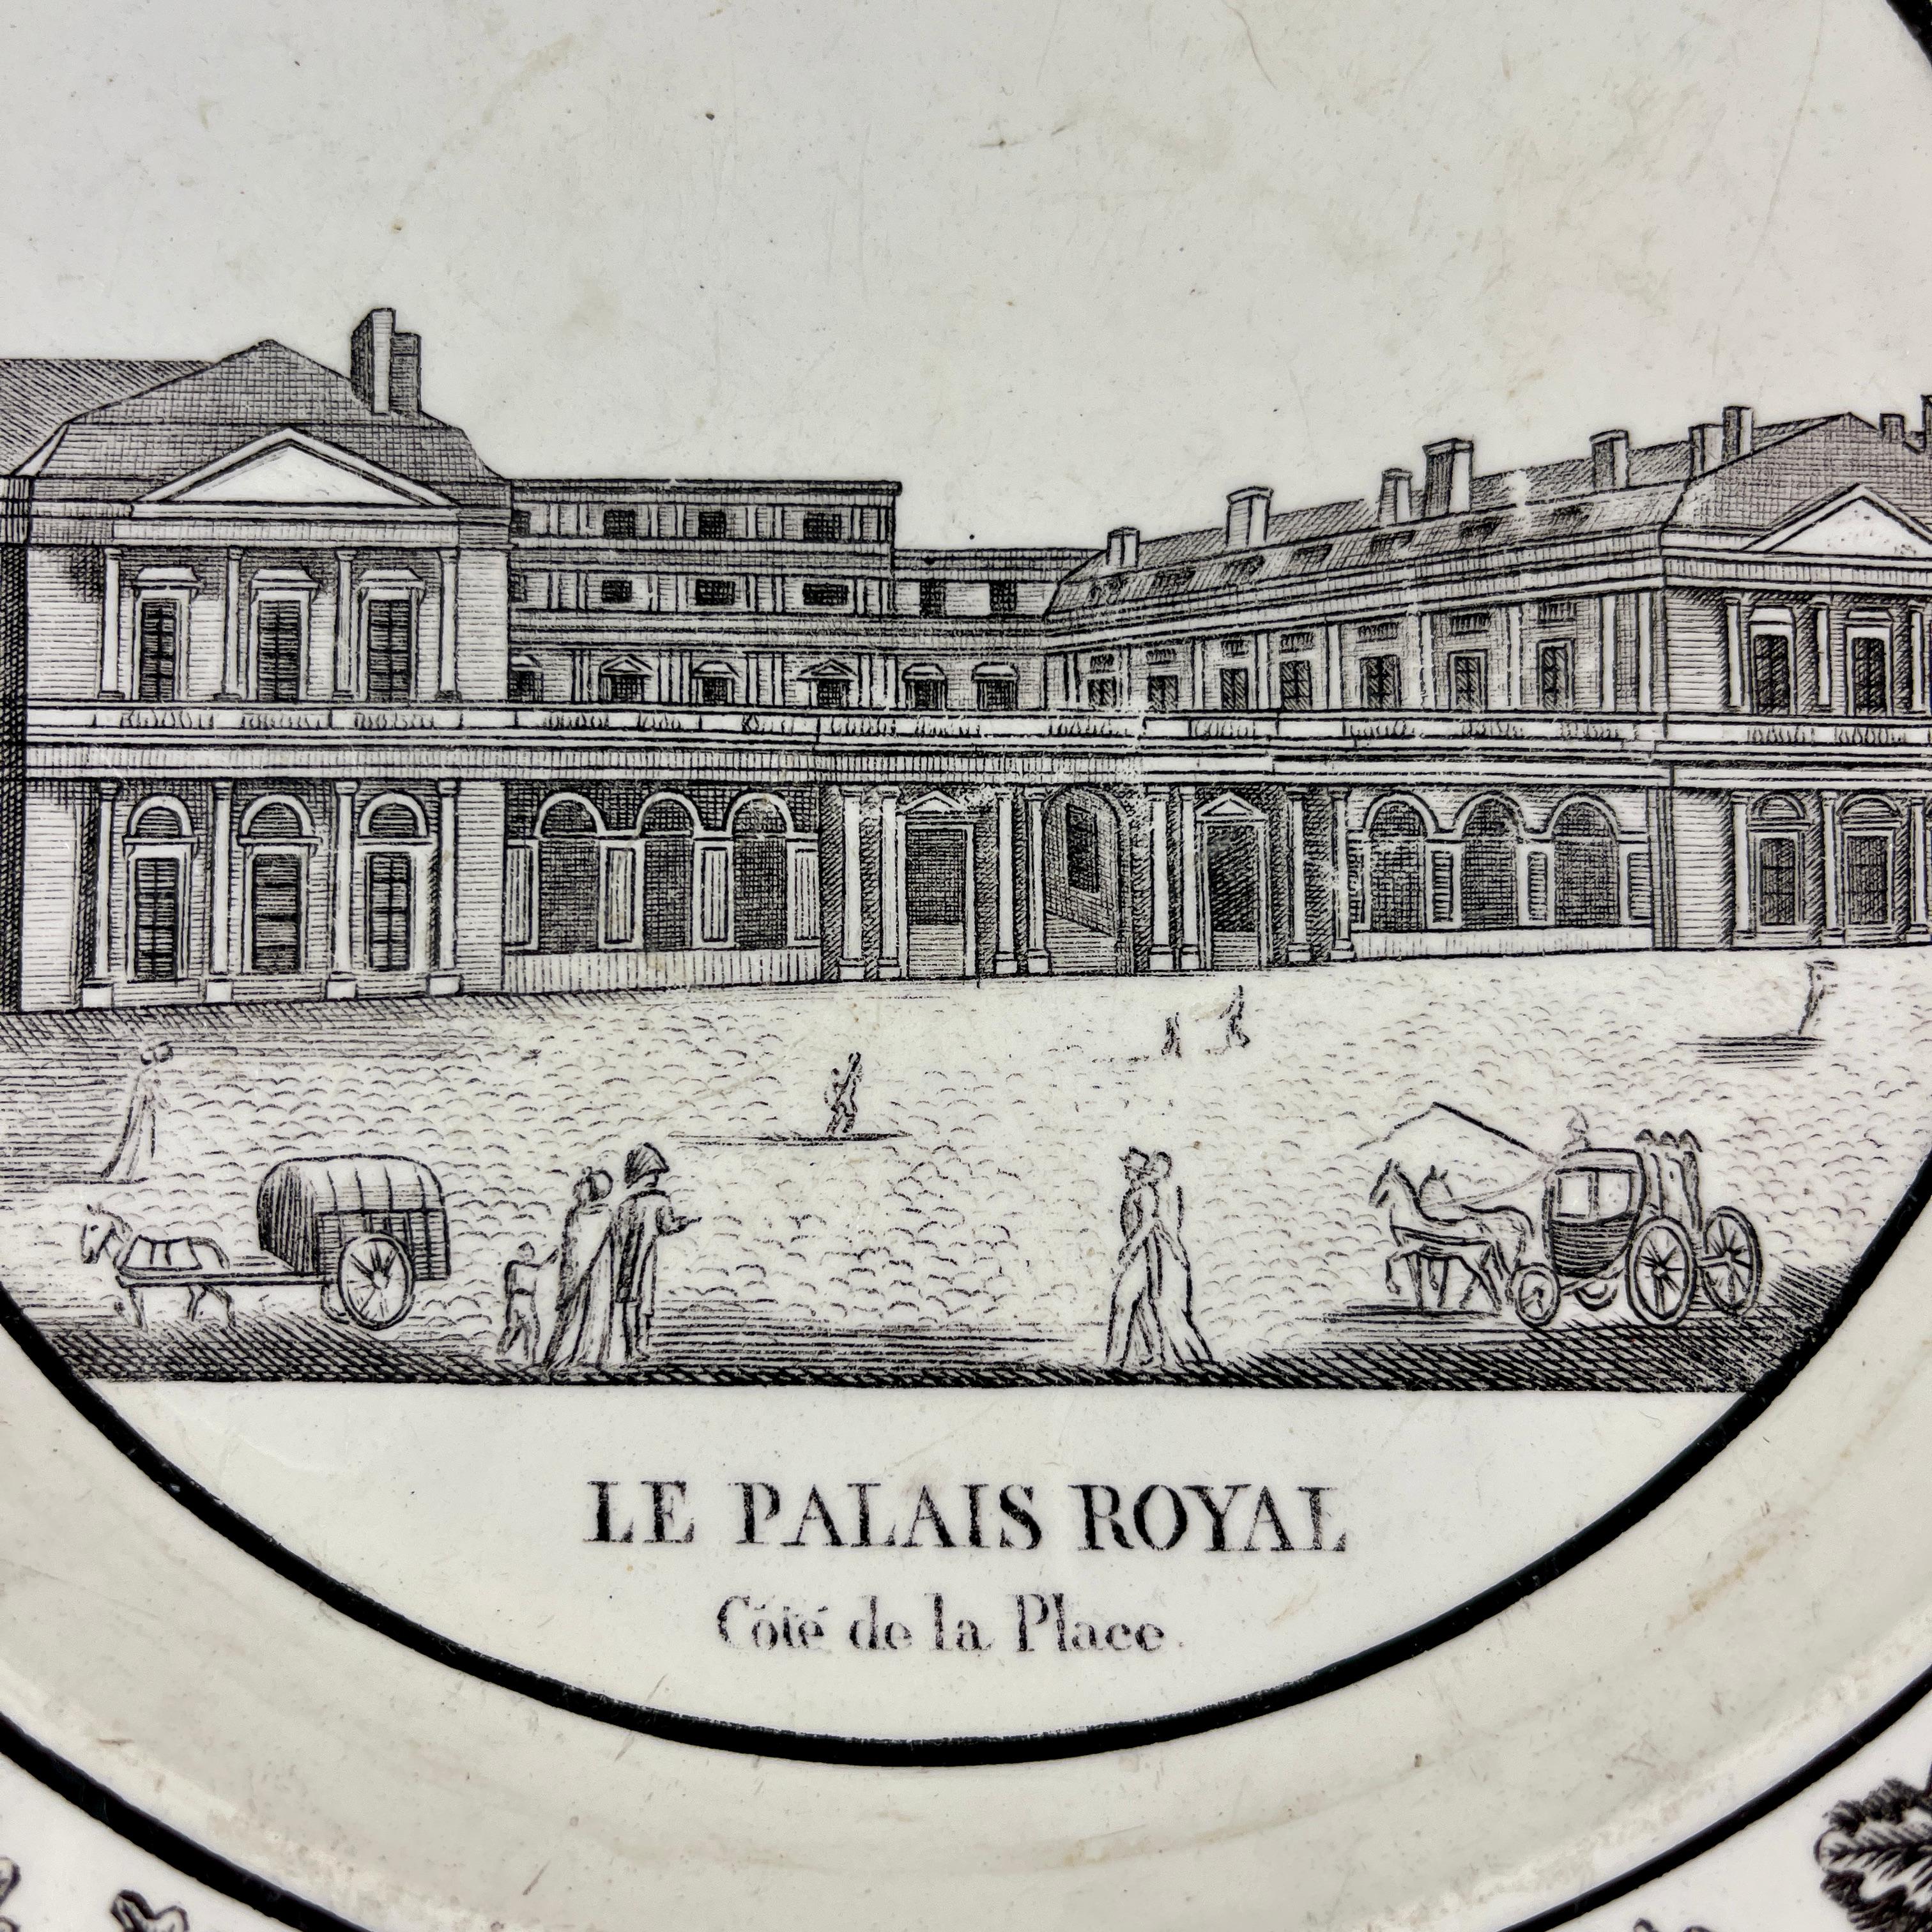 A French Neoclassical faïence transfer printed creamware plate produced by Montereau, Creil, circa 1824-1836.

A black transfer of an architectural image on a creamware body, depicting Le Palais Royal à Paris. The building is prominent, with the